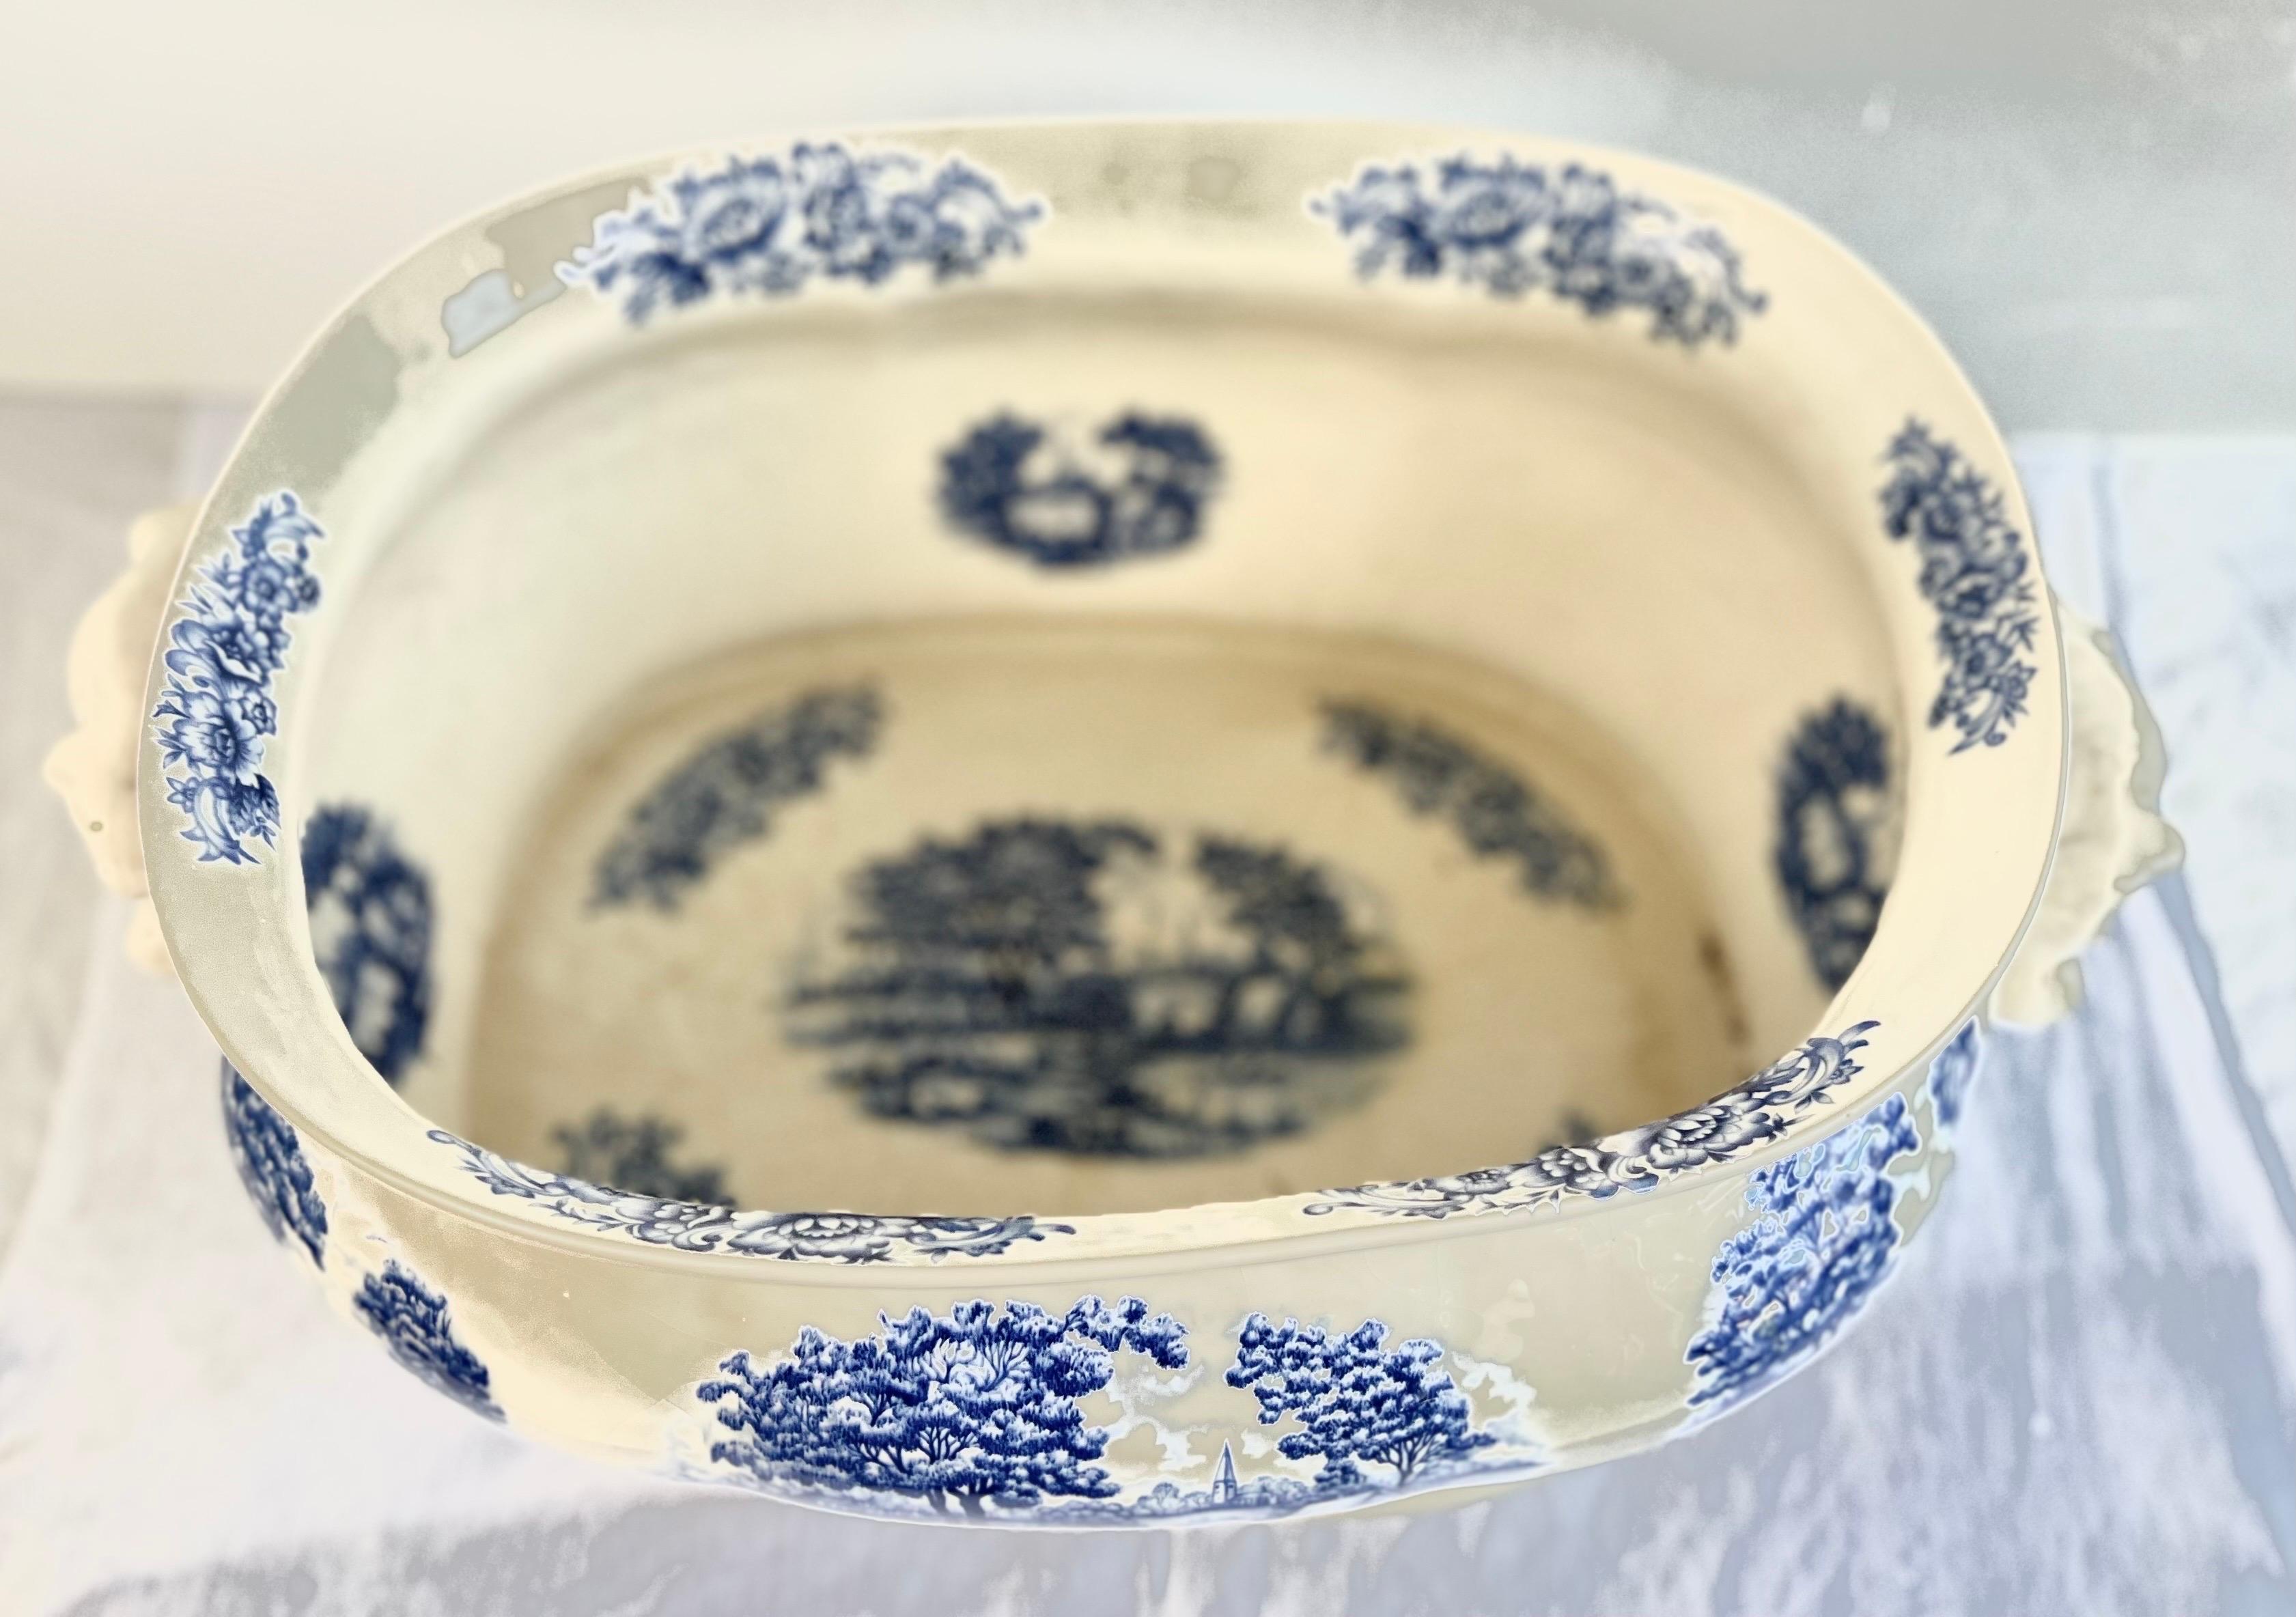 19th century oval shaped English Ttransferware cachepot.  It details blue & white pastoral european style landscape scenes throughout.   These designs are applied using a transfer printing technique, where a design is engraved onto a copper plate,